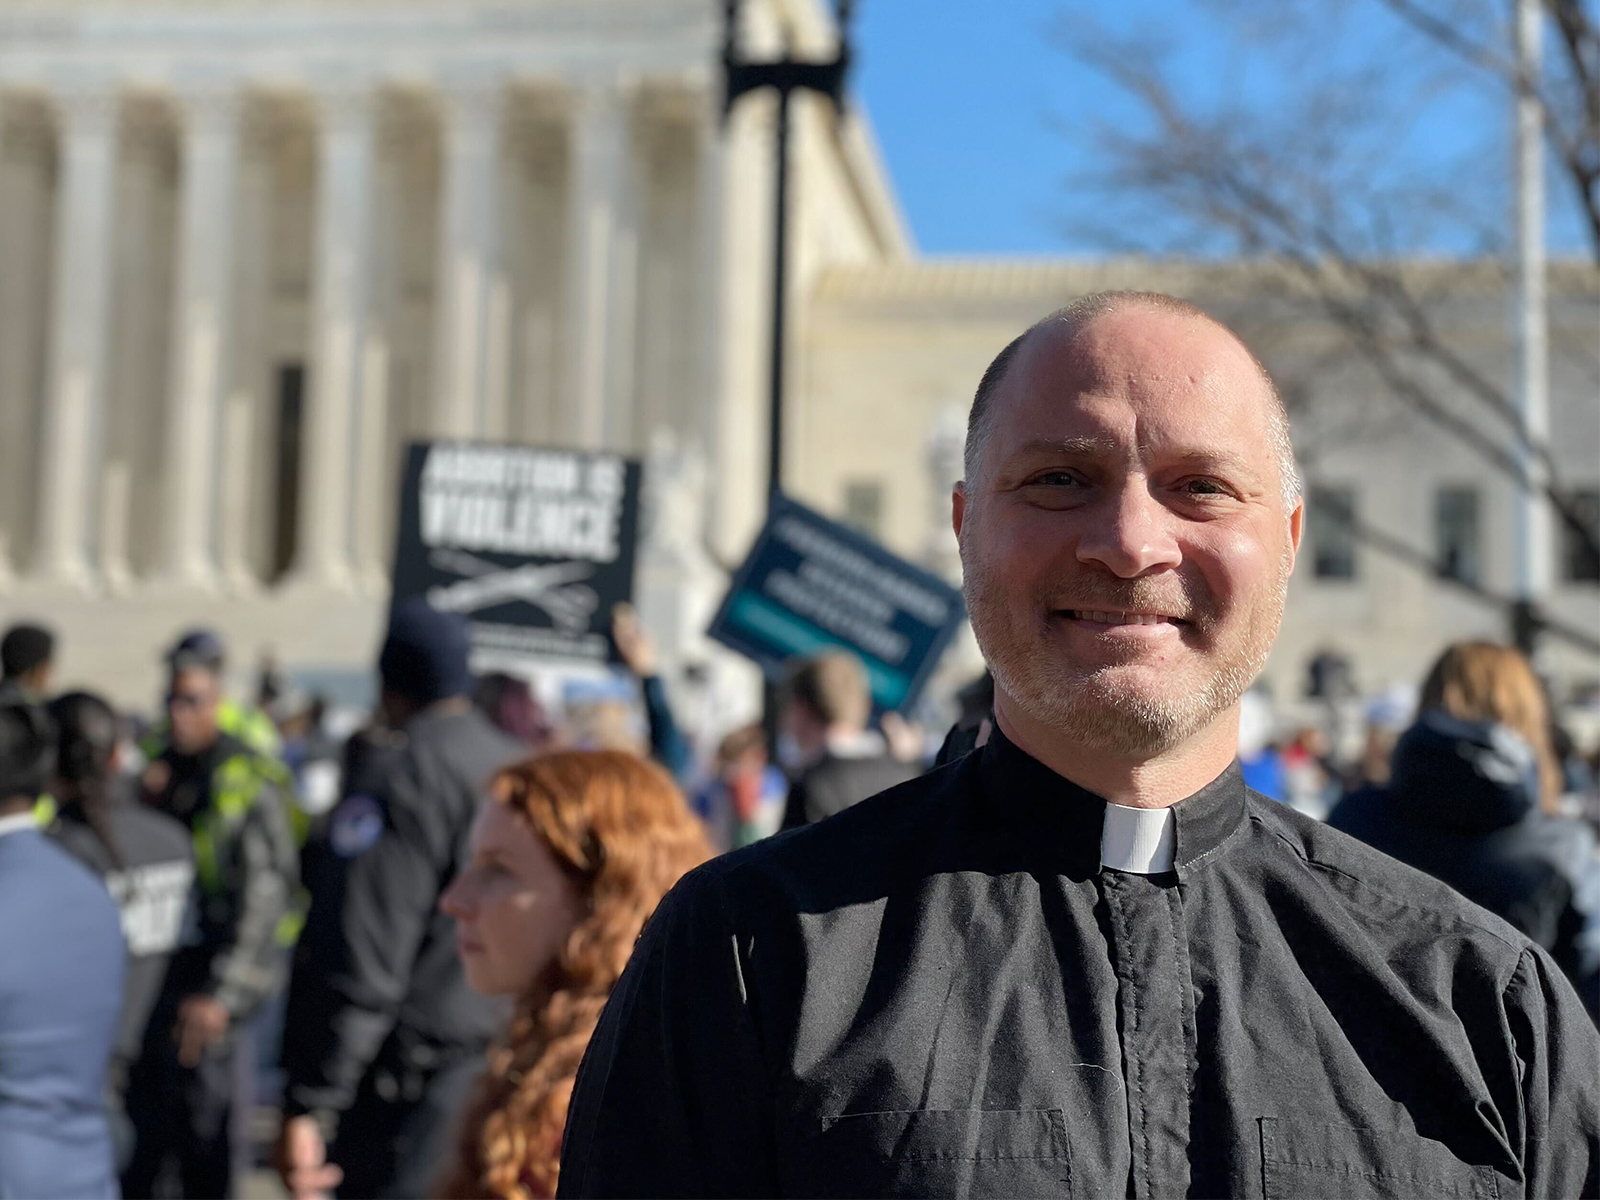 Reverend Michael Salemink in front of the United States Supreme Court, Wednesday, December 1, 2021, in Washington, DC RNS photo by Jack Jenkins